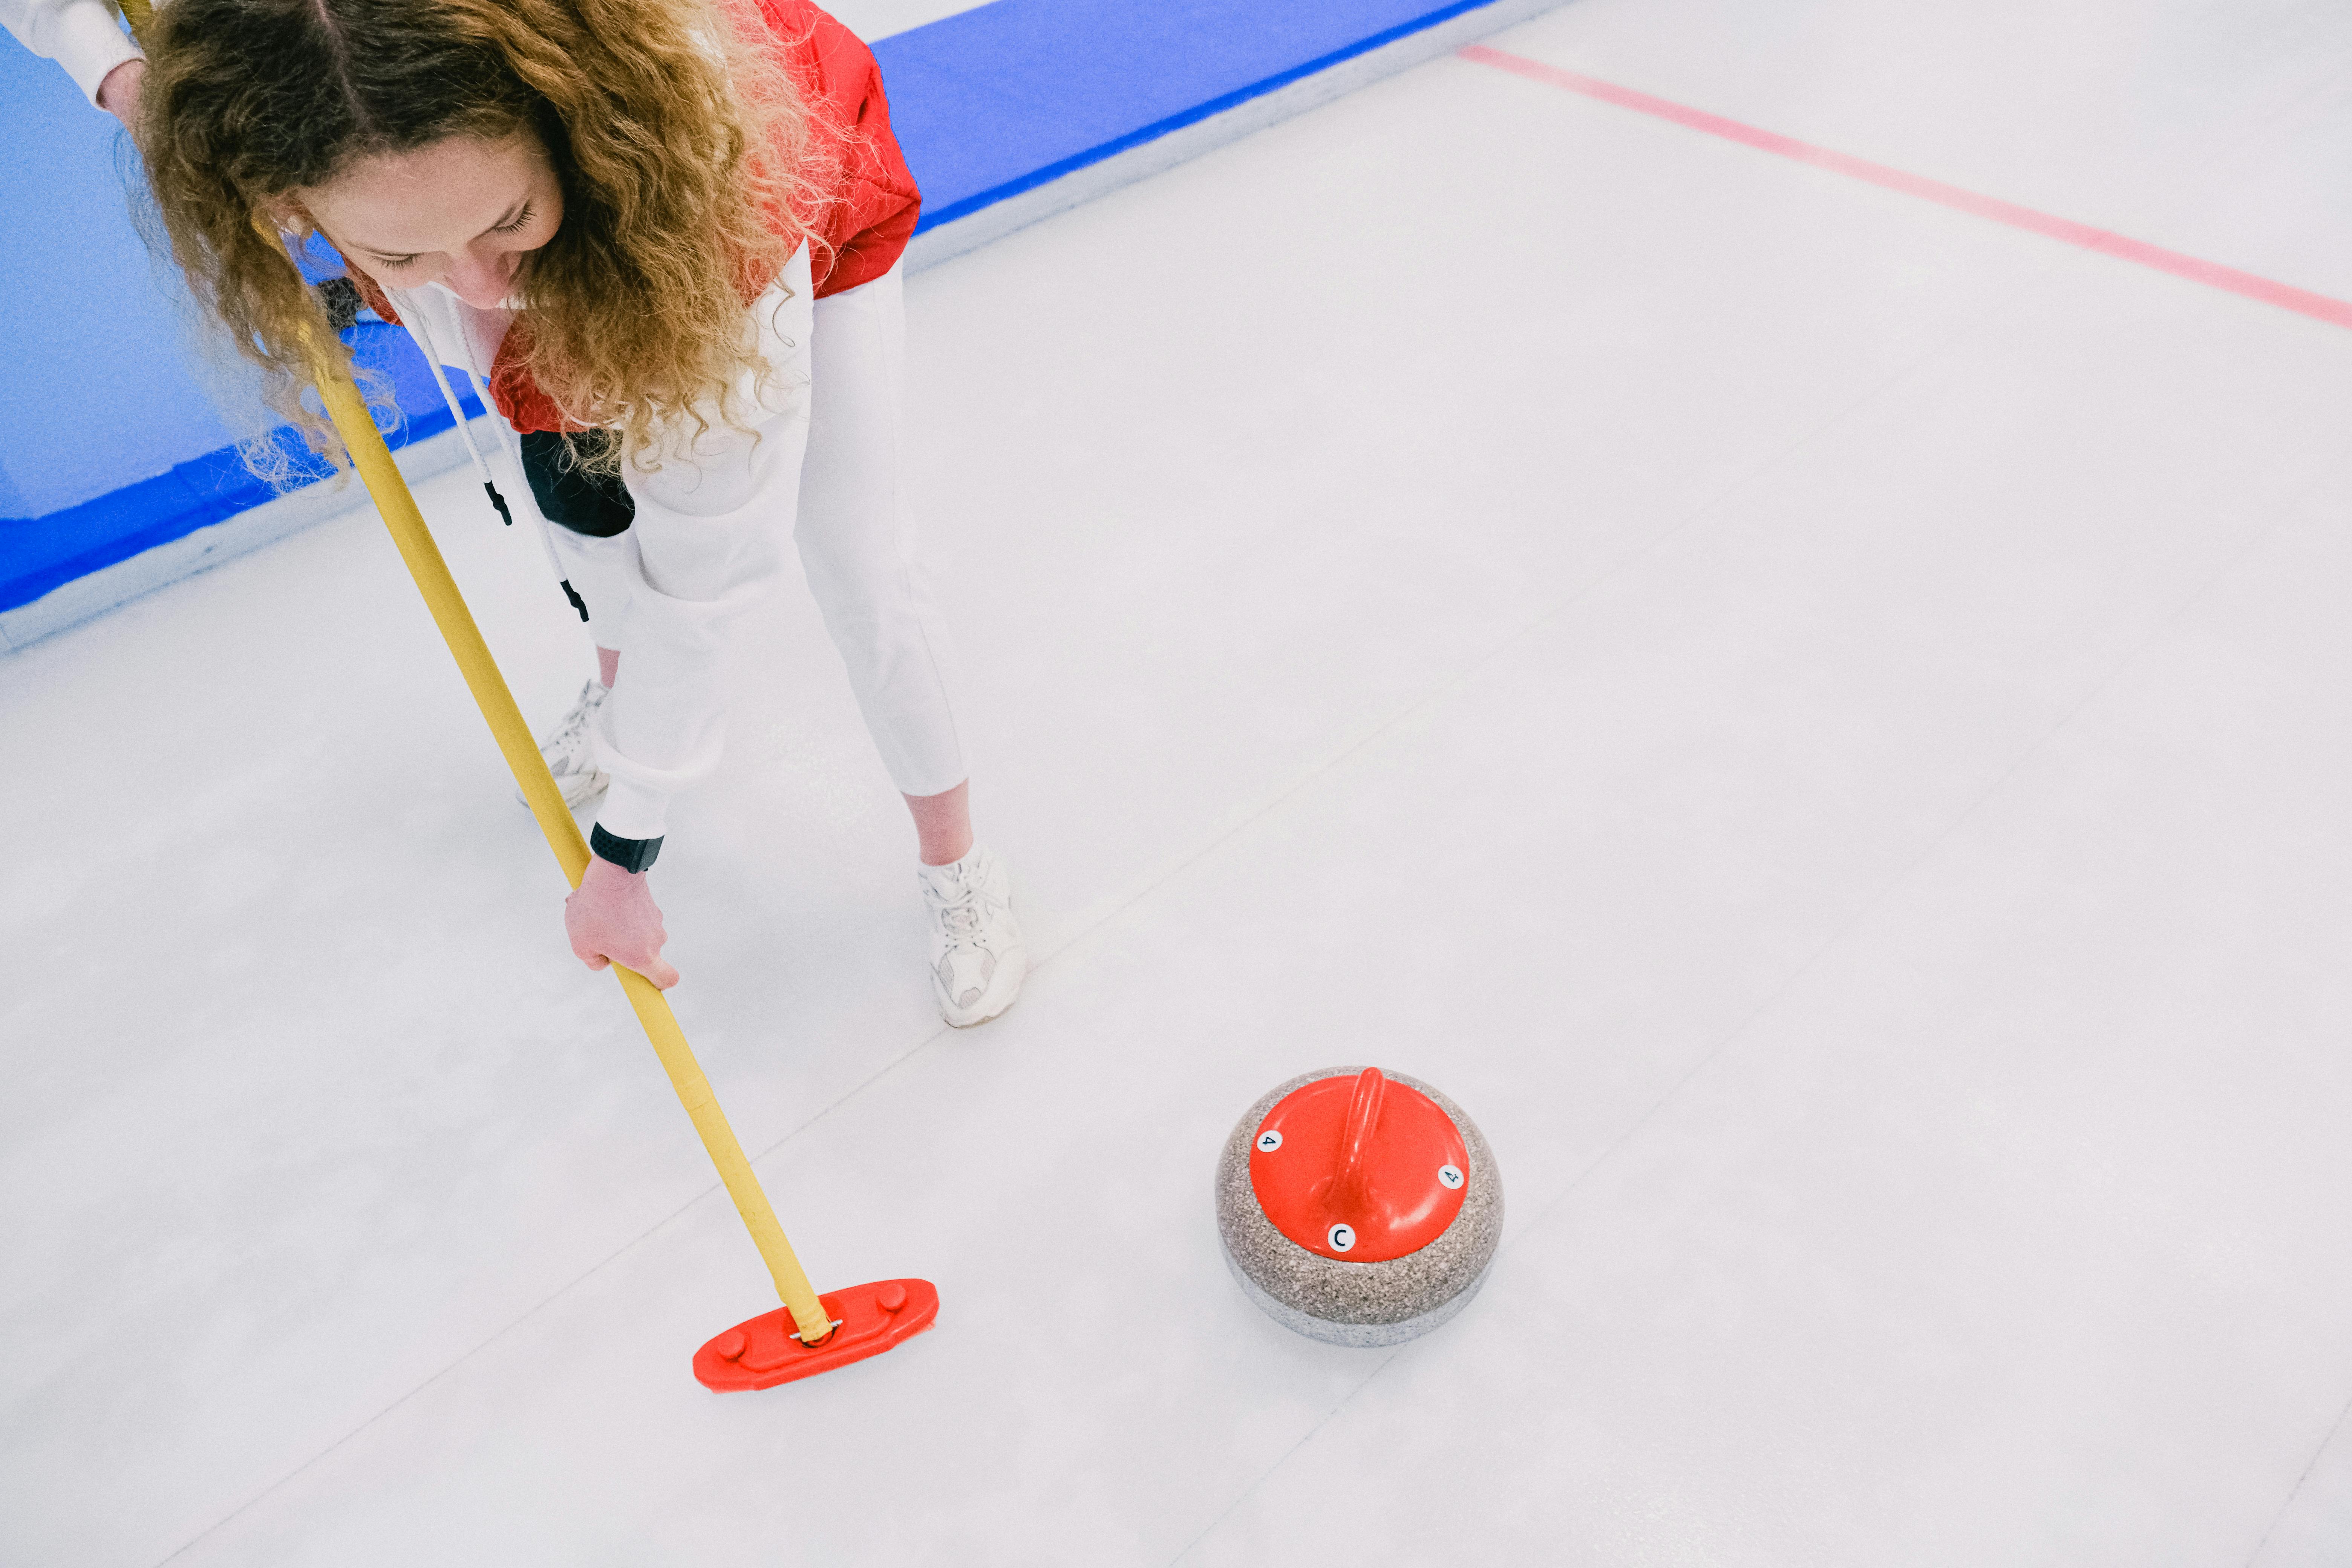 play free curling